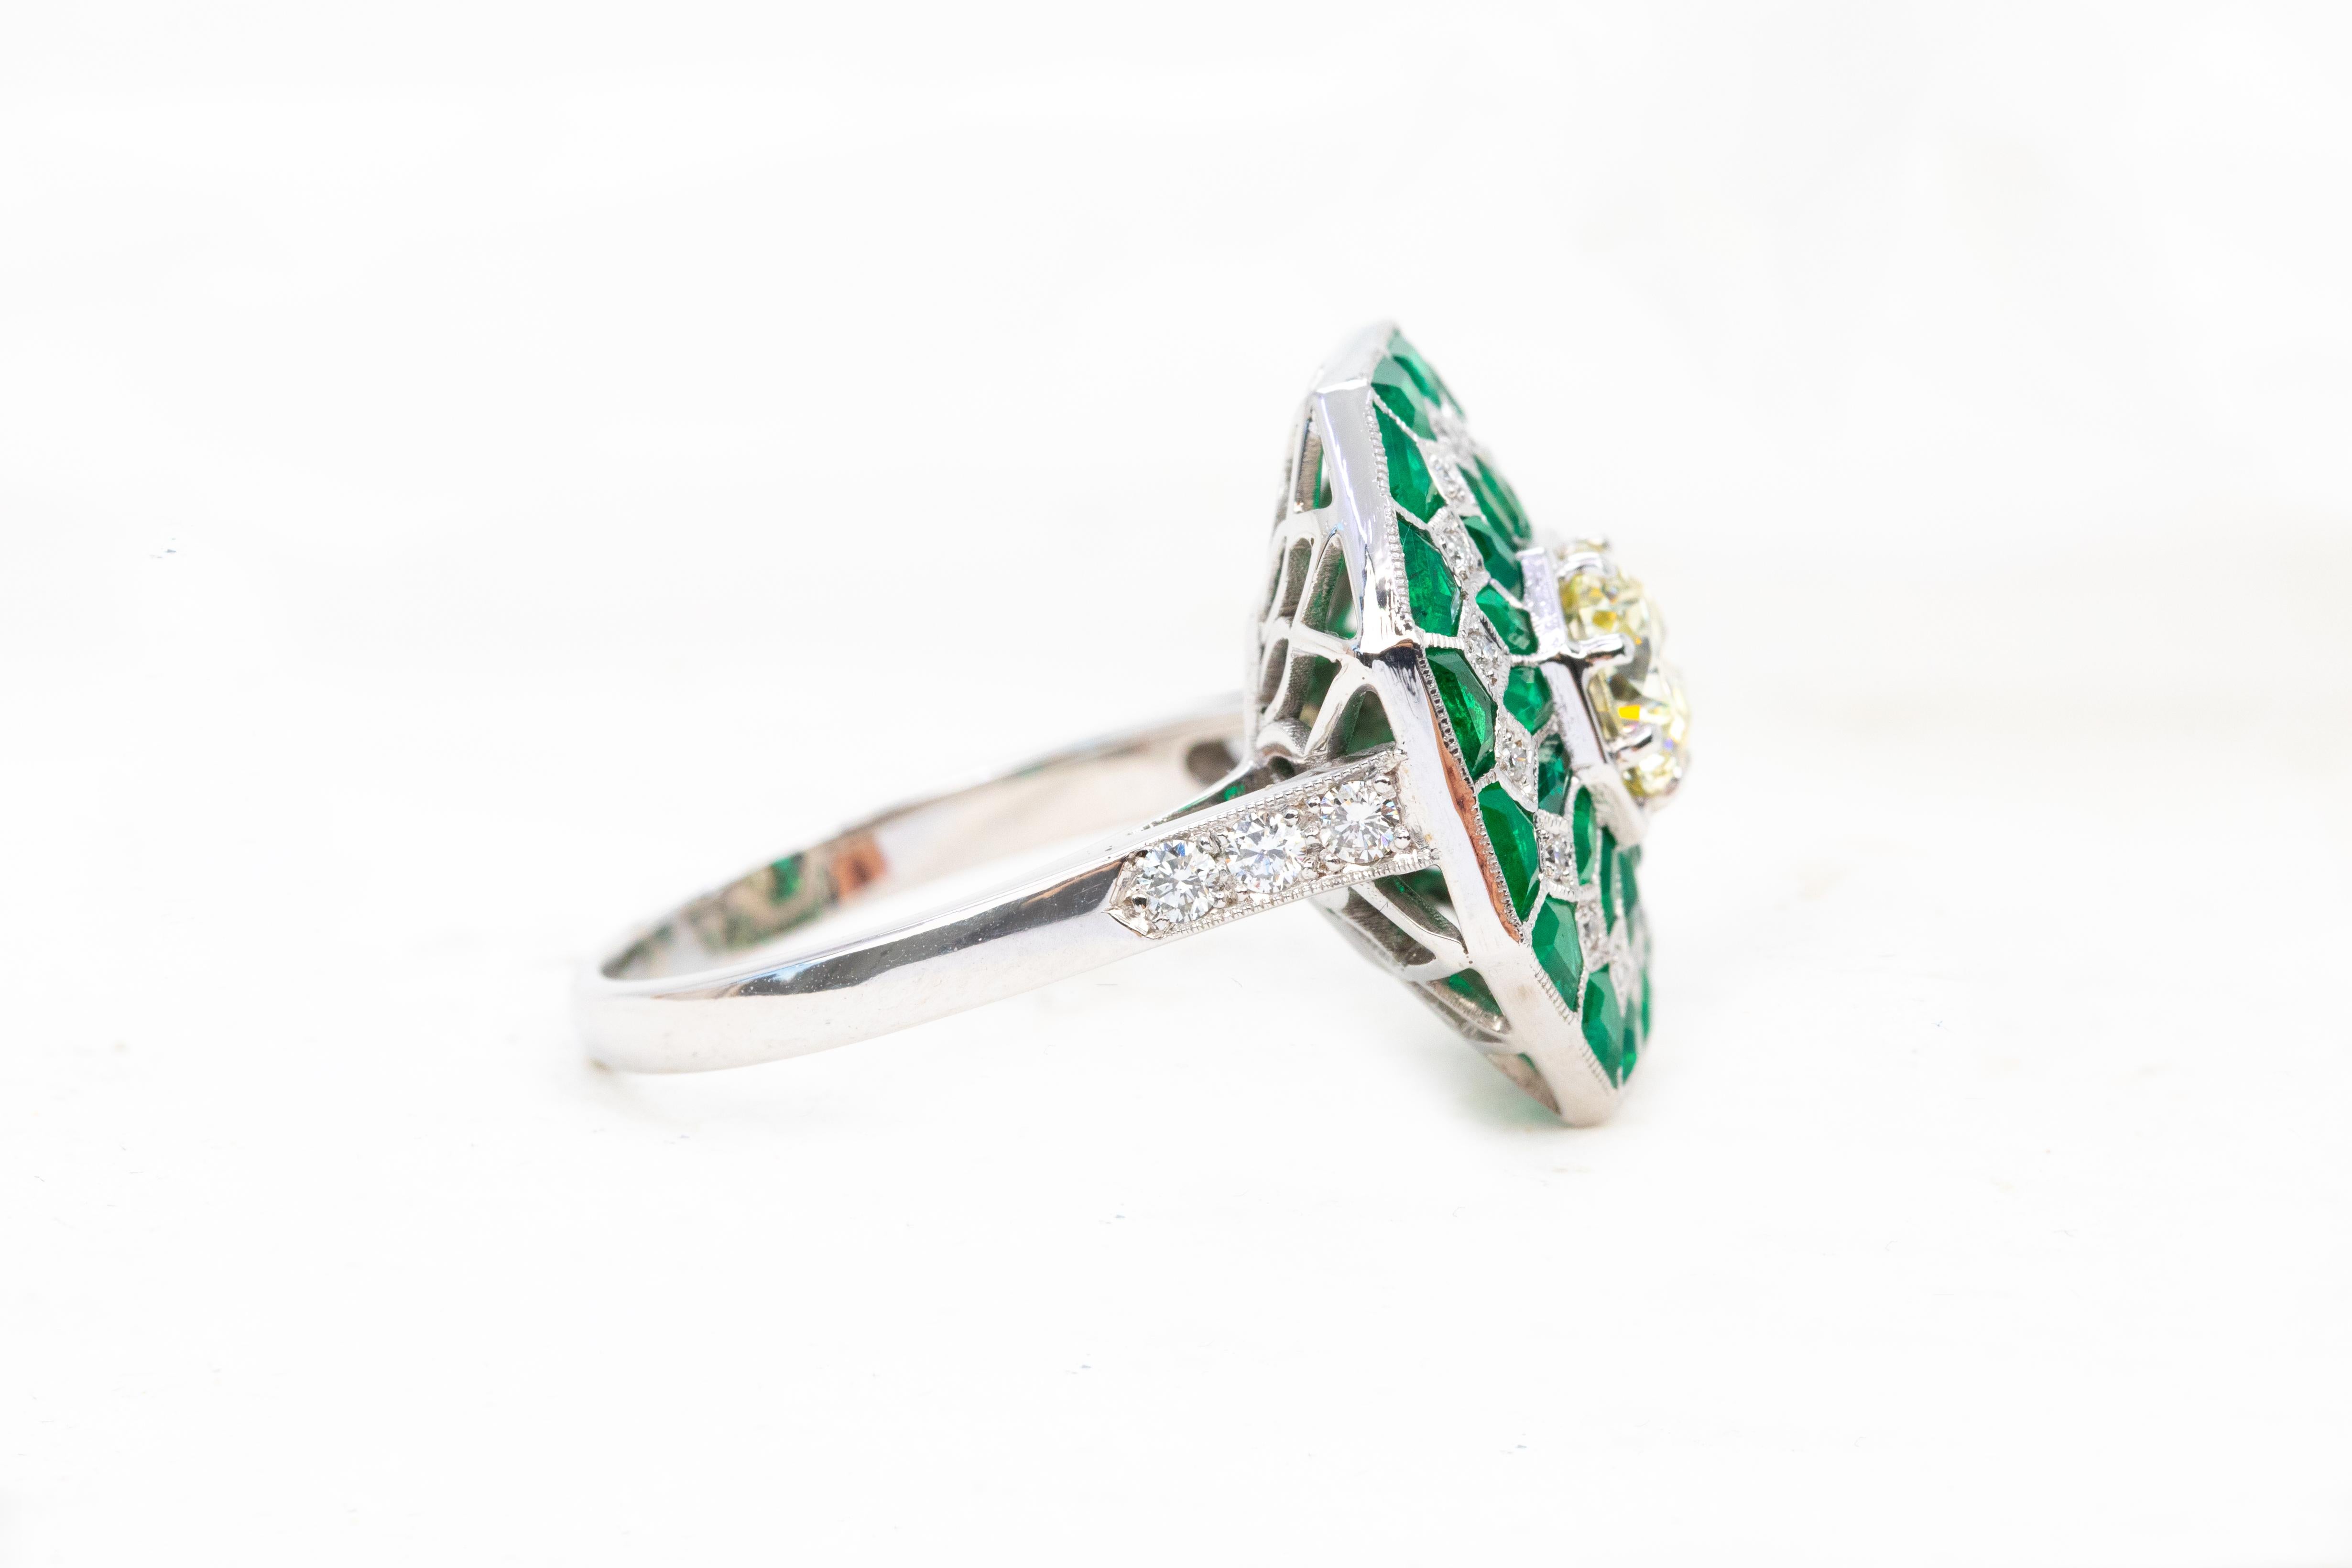 18K Gold Art Deco 1.05 ct. Diamond and Emerald Cocktail Ring

This ring was made with quality materials and excellent handwork. I guarantee the quality assurance of my handwork and materials. It is vital for me that you are totally happy with your